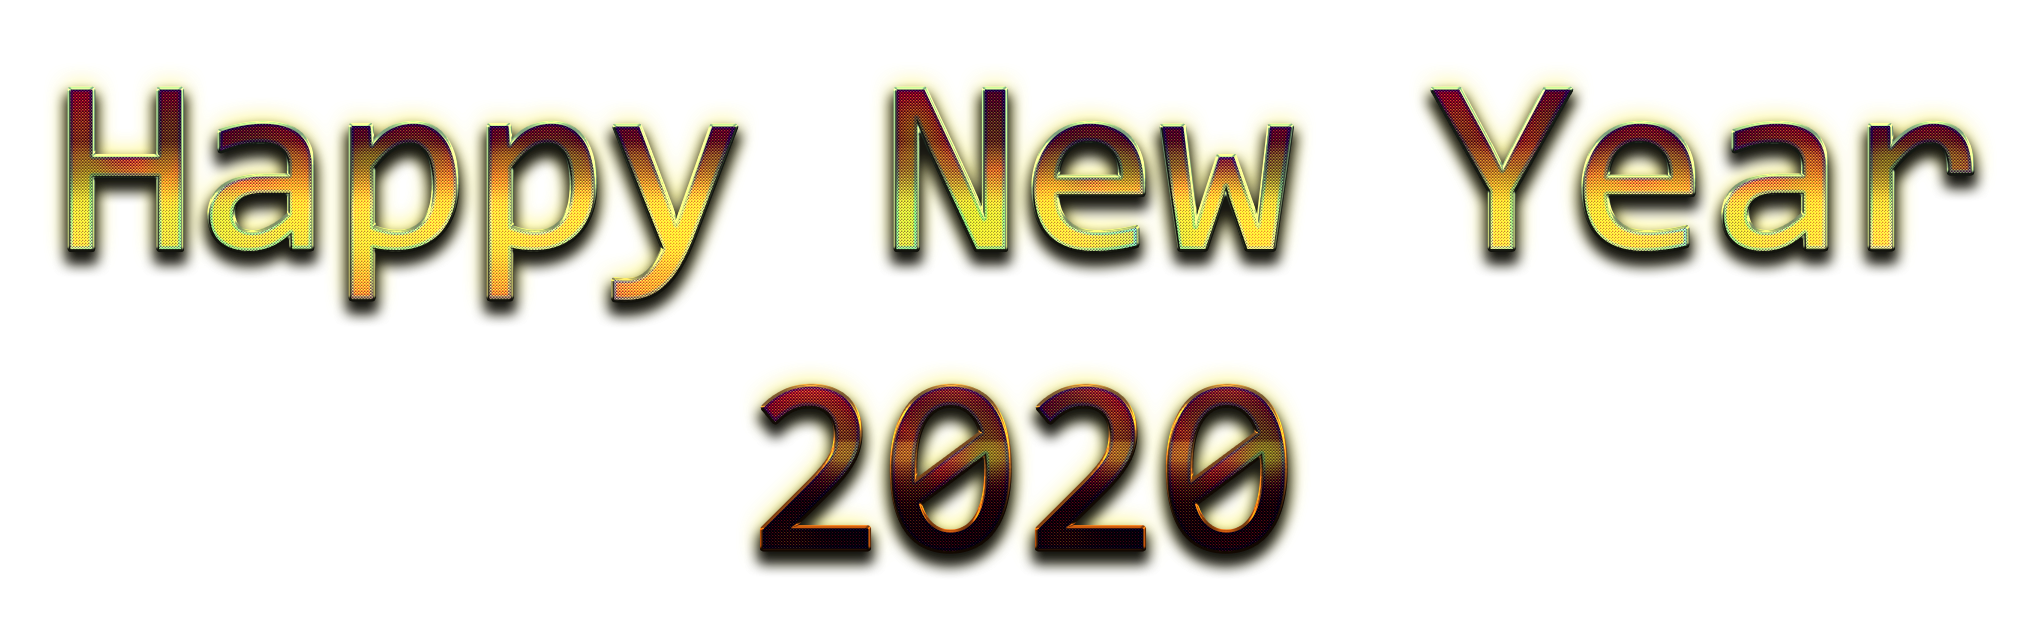 New Year 2020 PNG Image